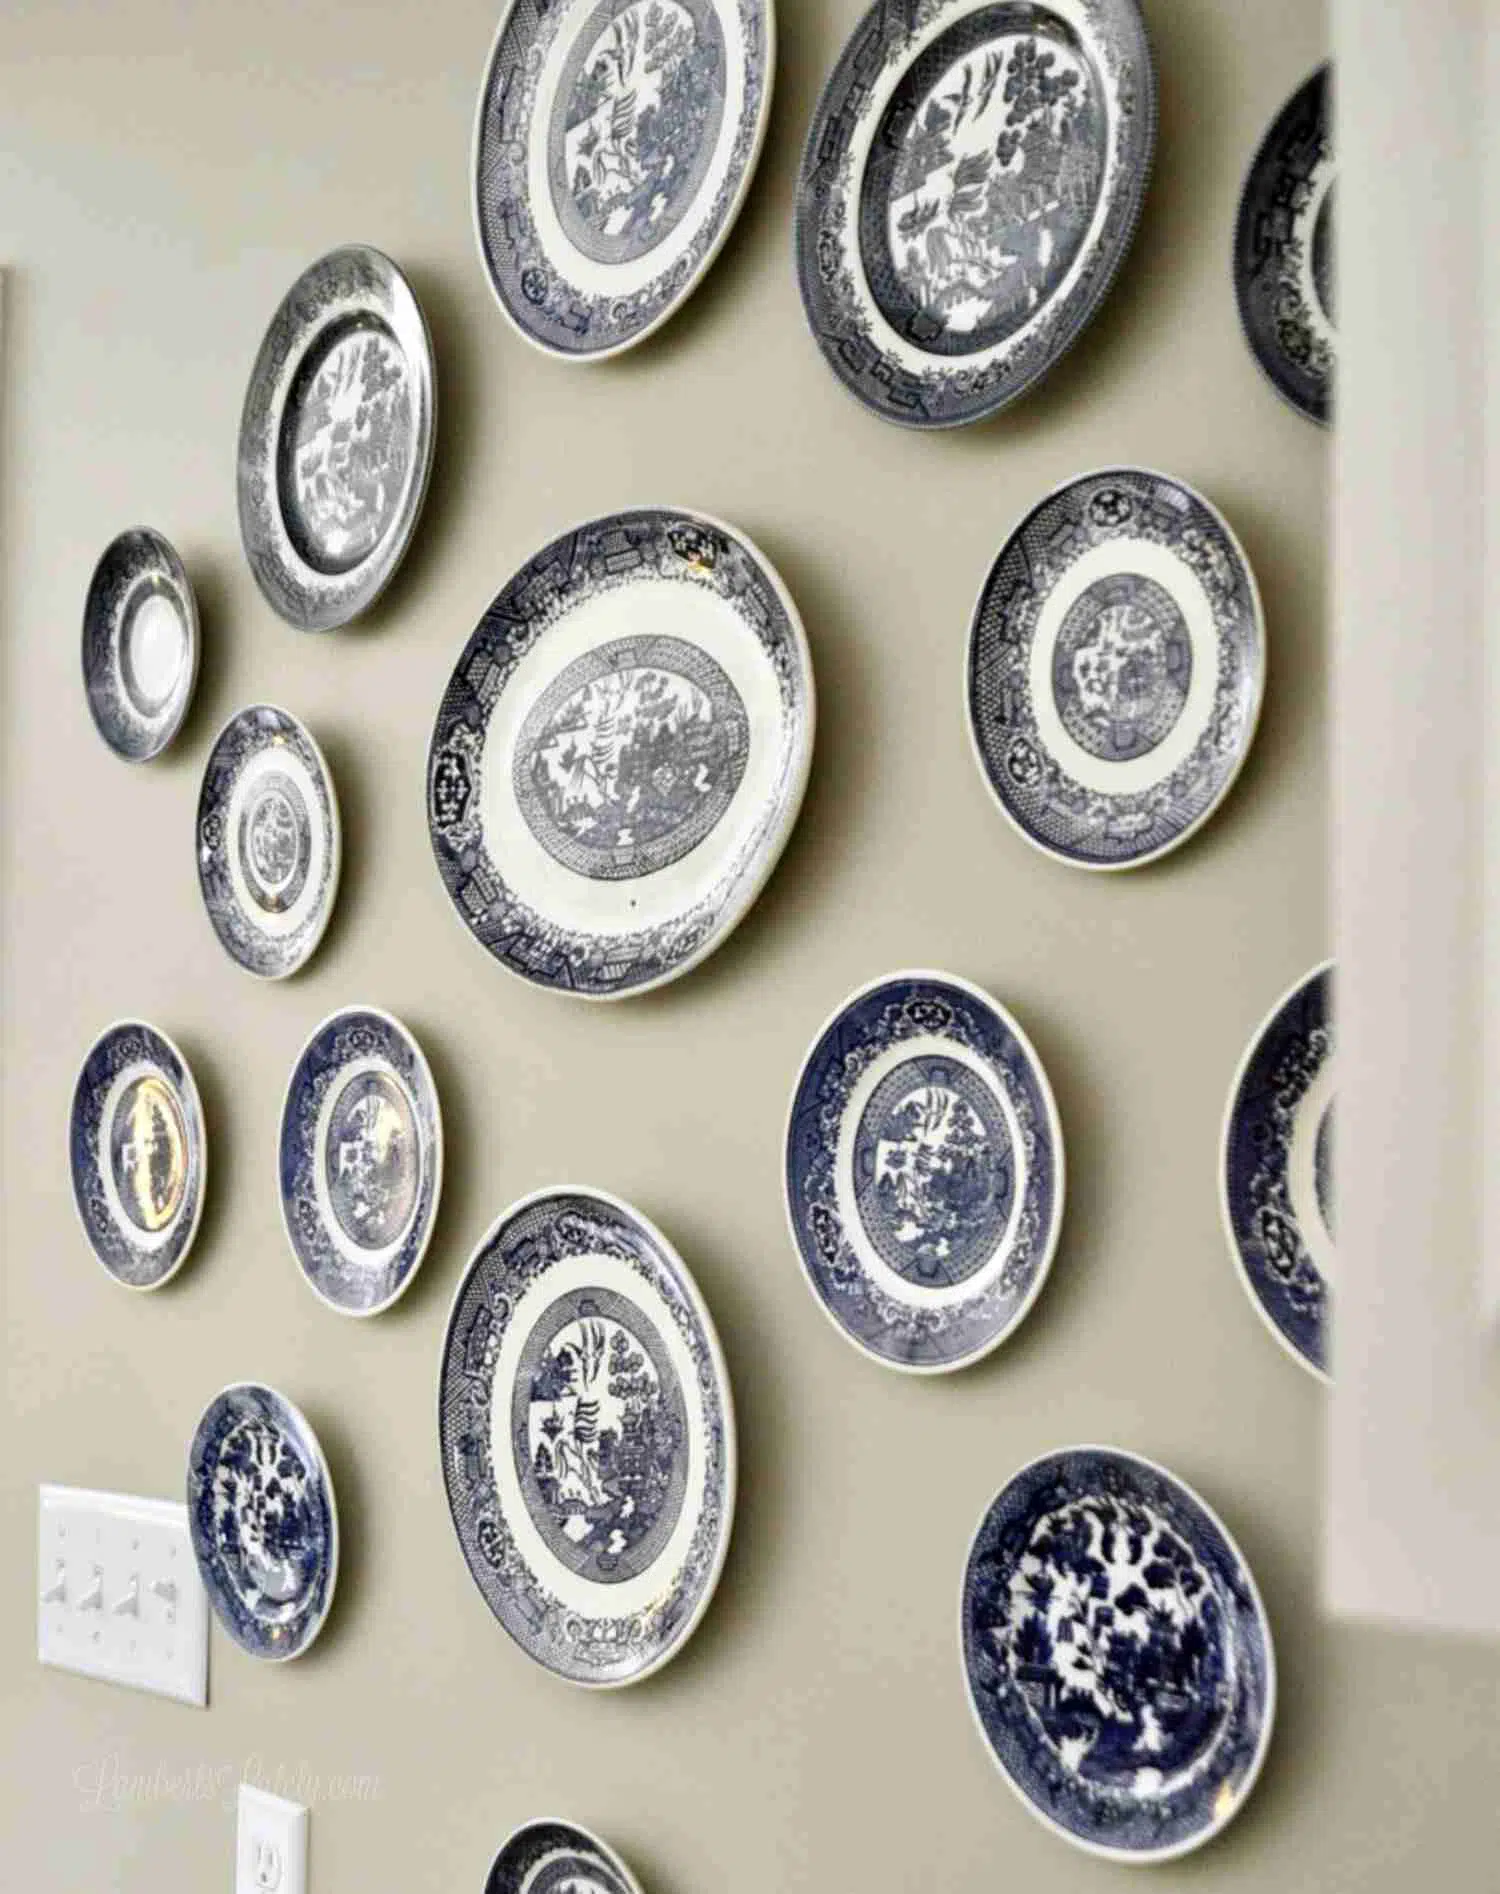 blue and white plates hung on a wall.